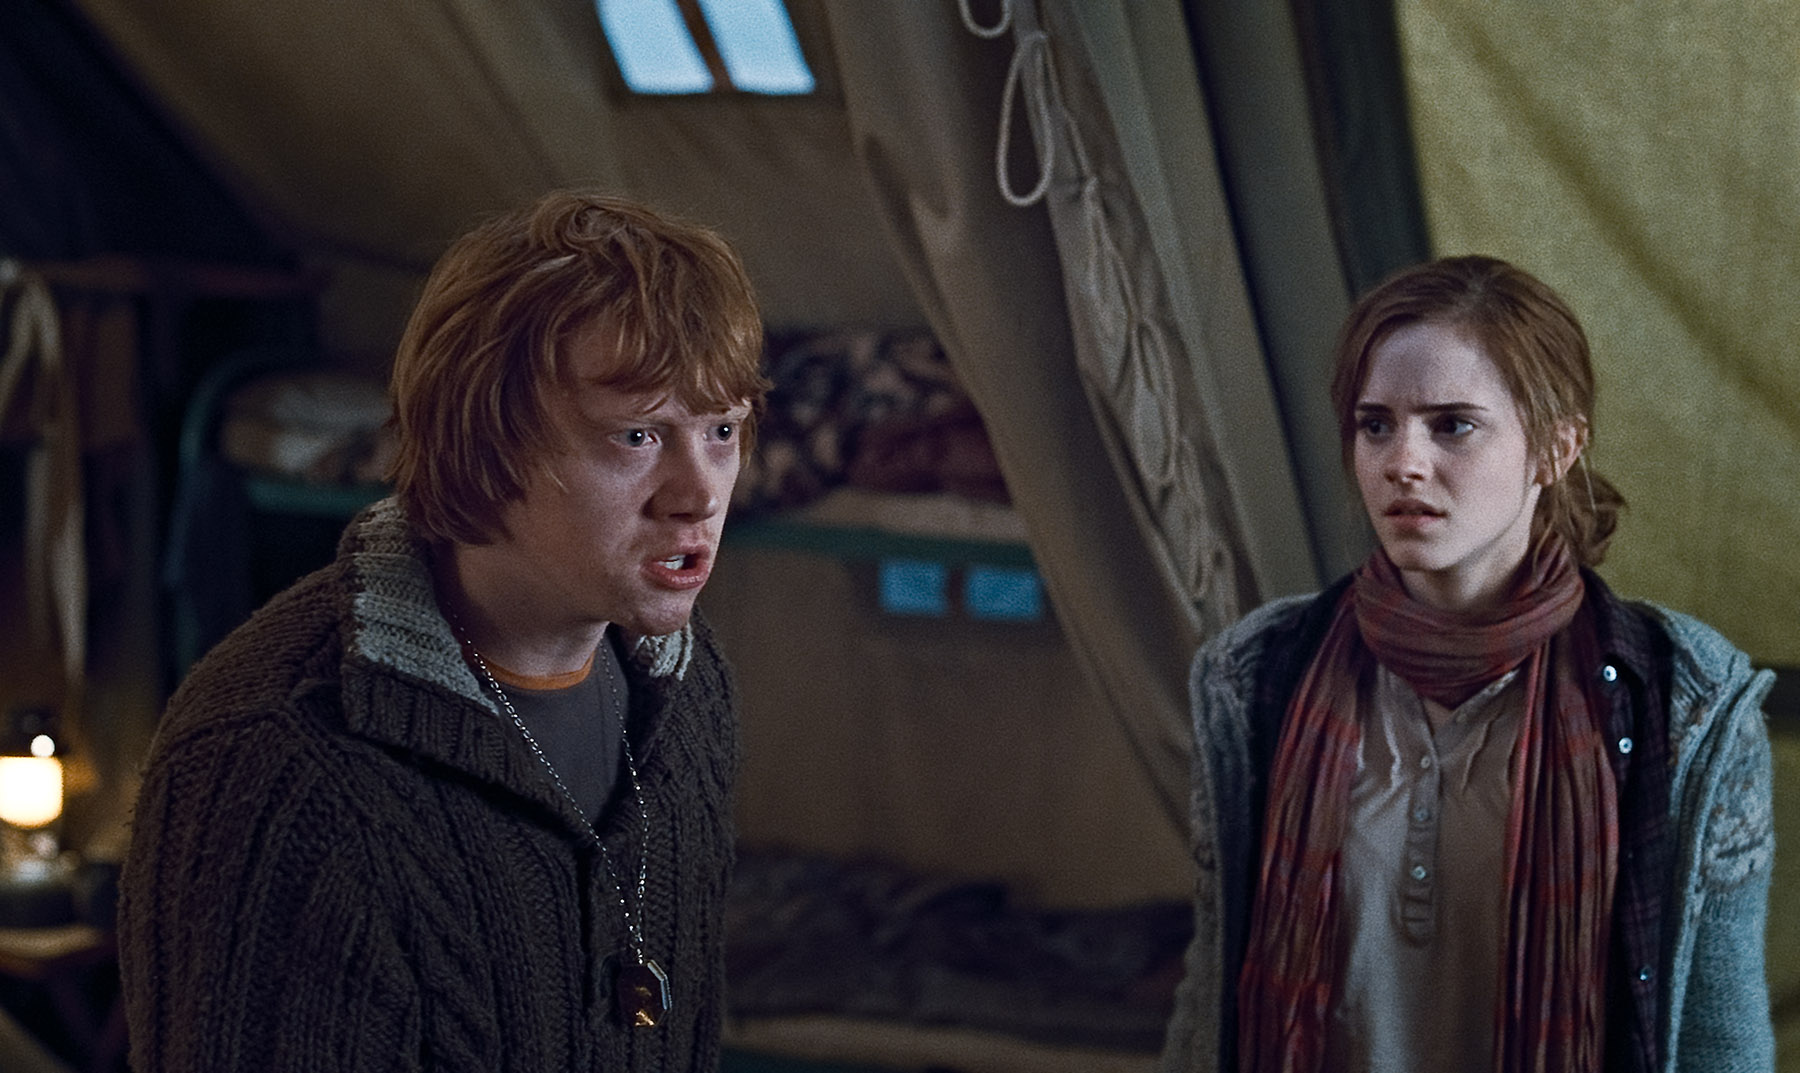 http://simplywallpaper.net/pictures/2010/10/07/Ron-Hermione-Harry-Potter-Deathly-Hallows-Wallpaper.jpg